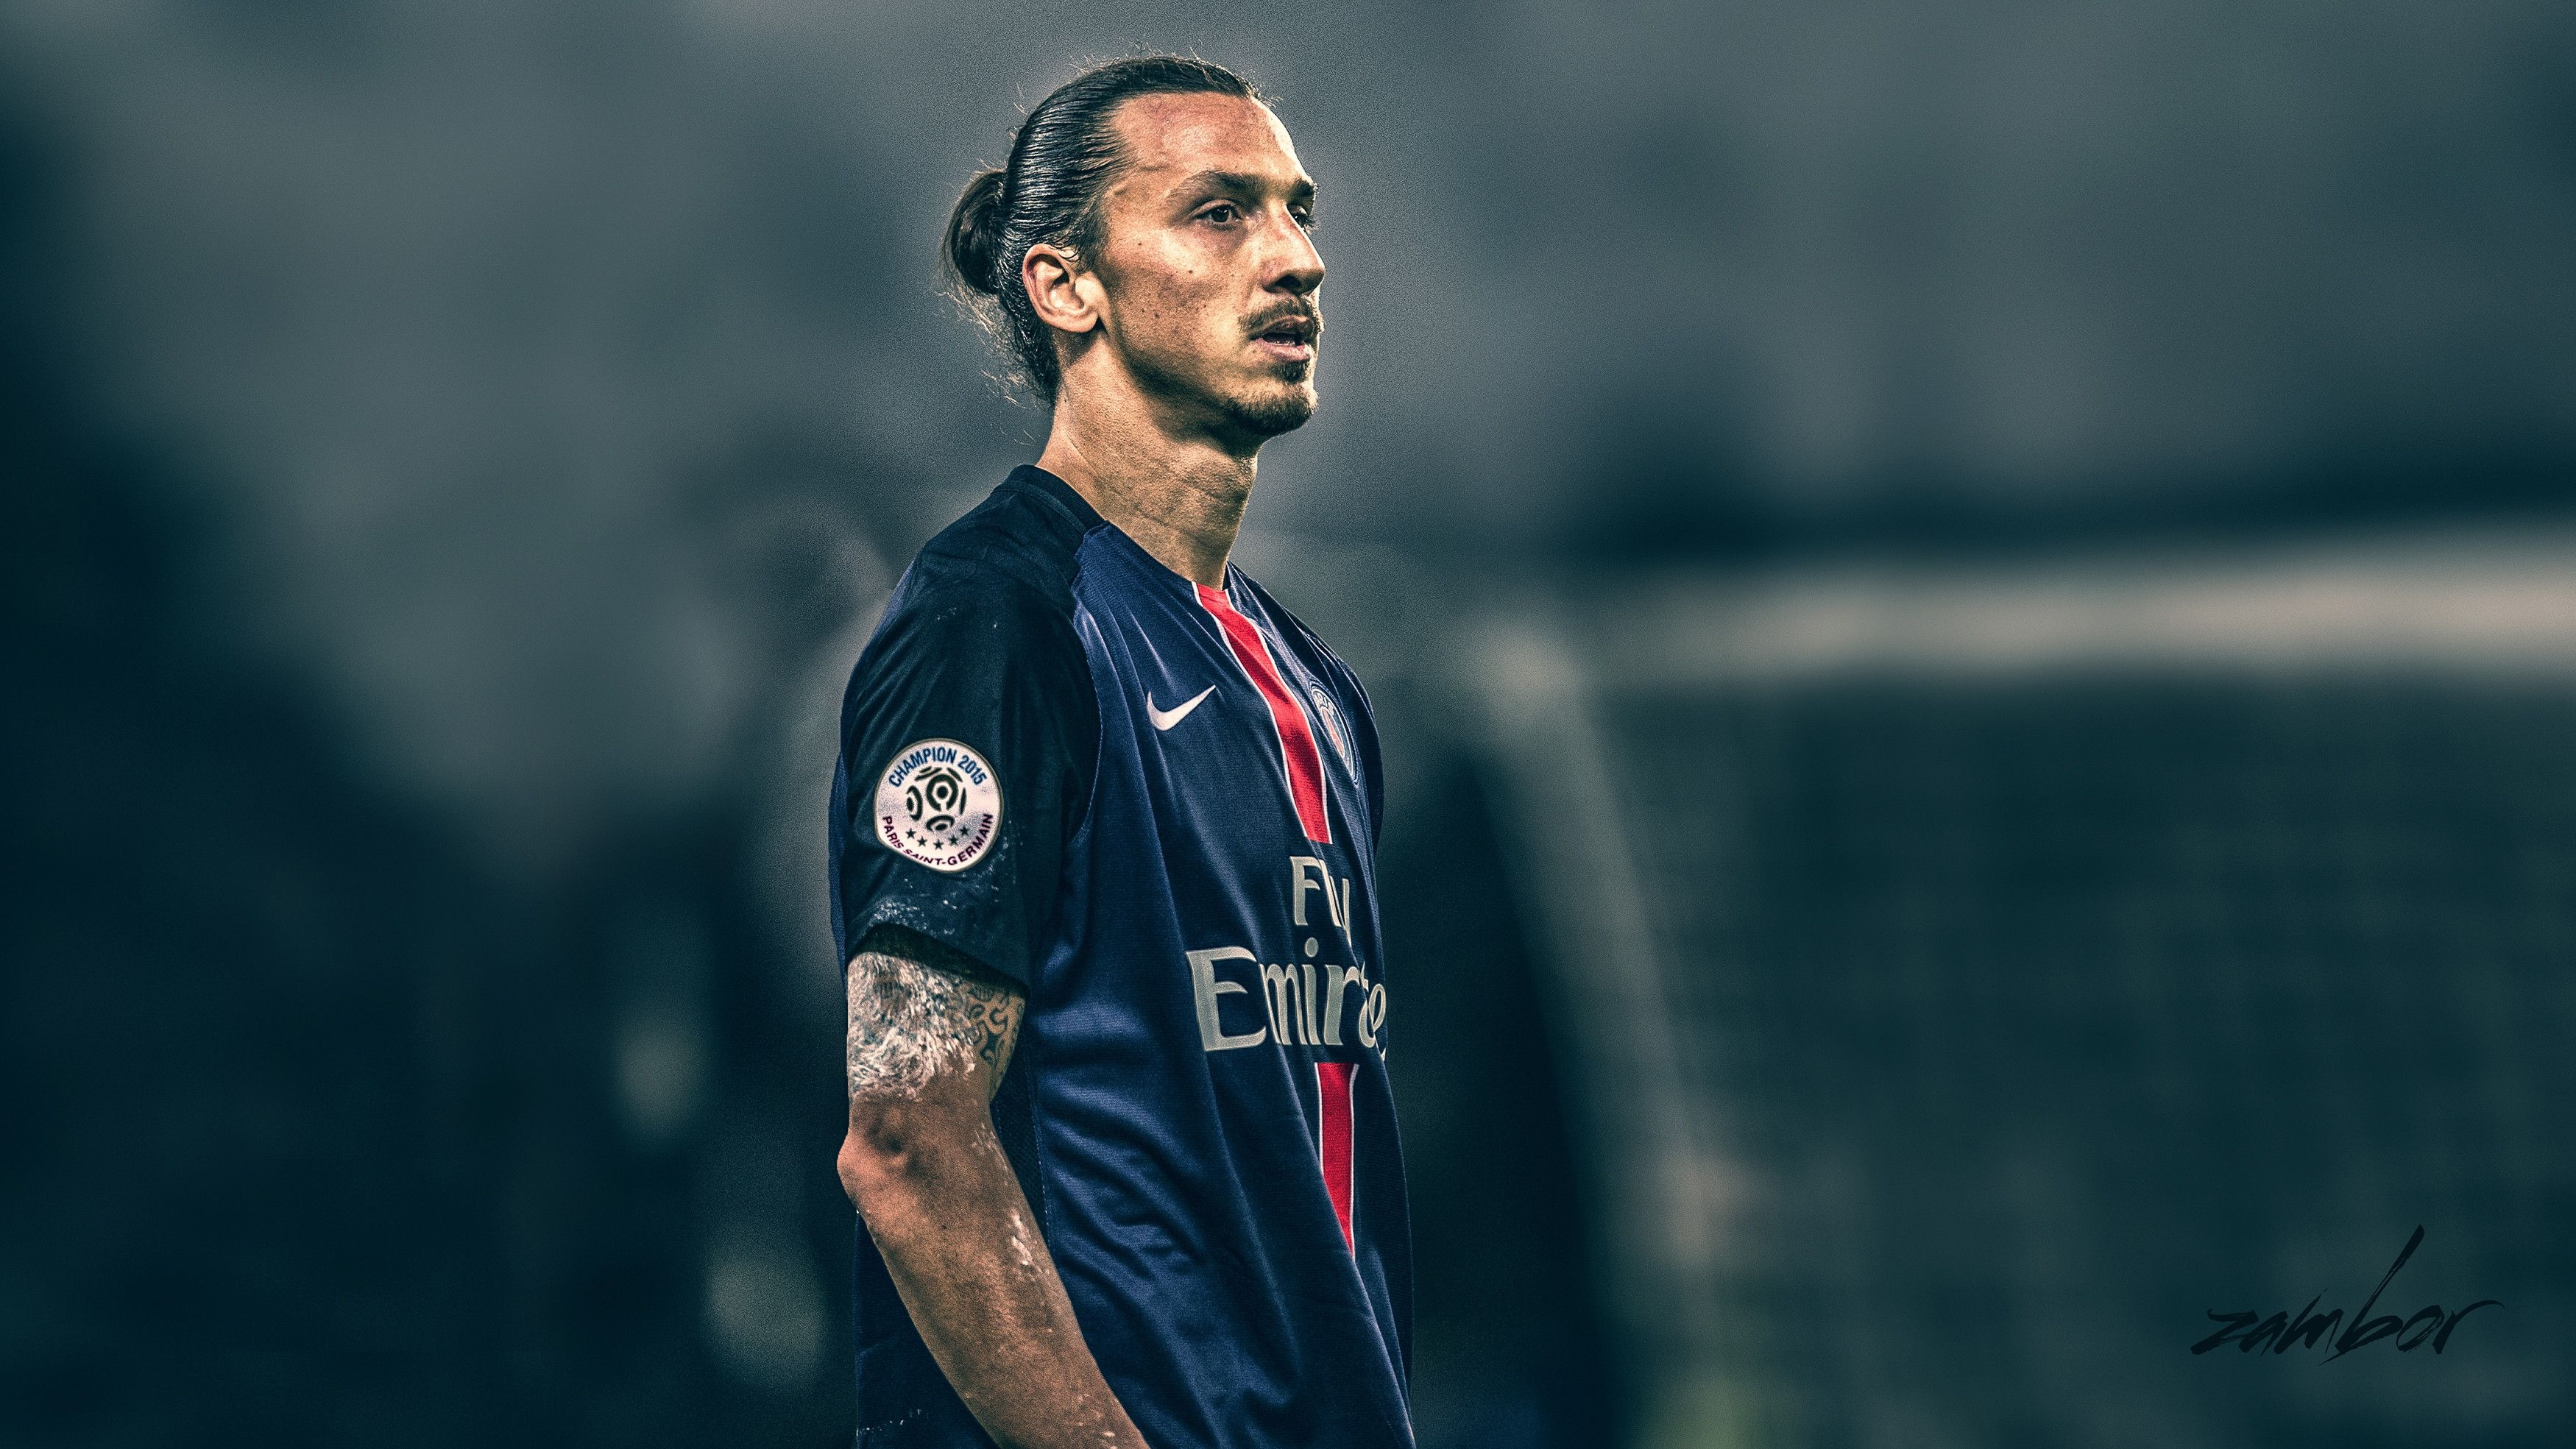 Zlatan Ibrahimovic 2021 Wallpapers posted by Ethan Anderson 3500x1970